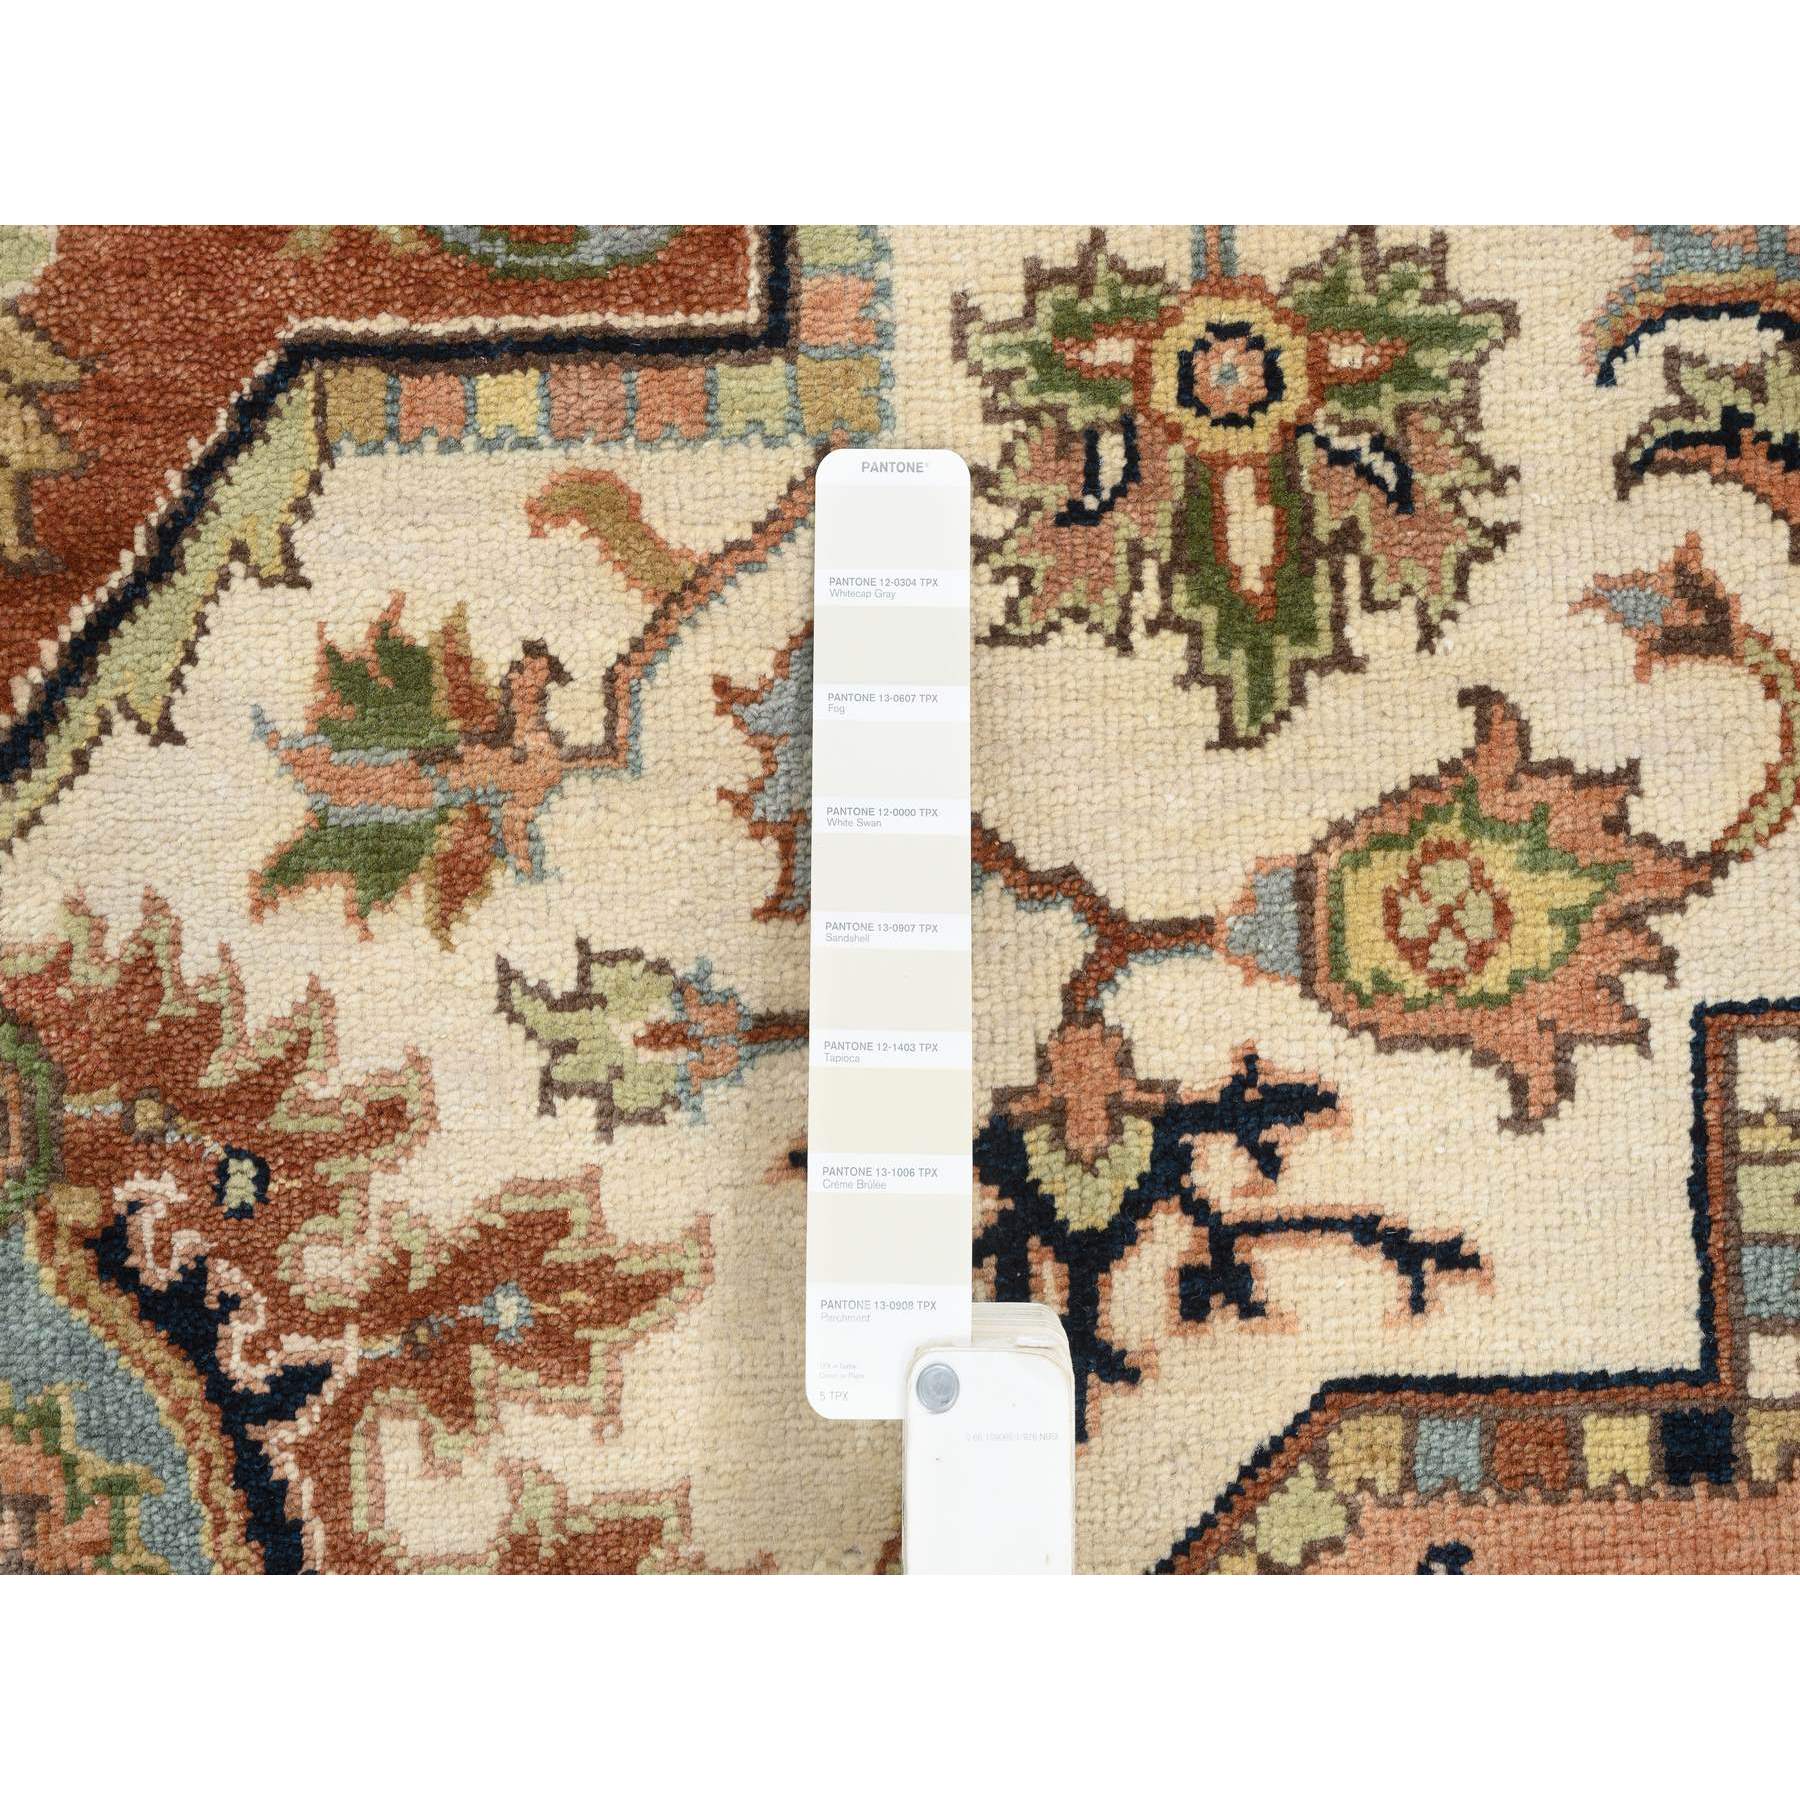 7'10"x10' Ivory and Rust, Hand Woven Heriz with Classic Geometric Medallion Design, Thick and Plush Pure Wool, Oriental Rug 